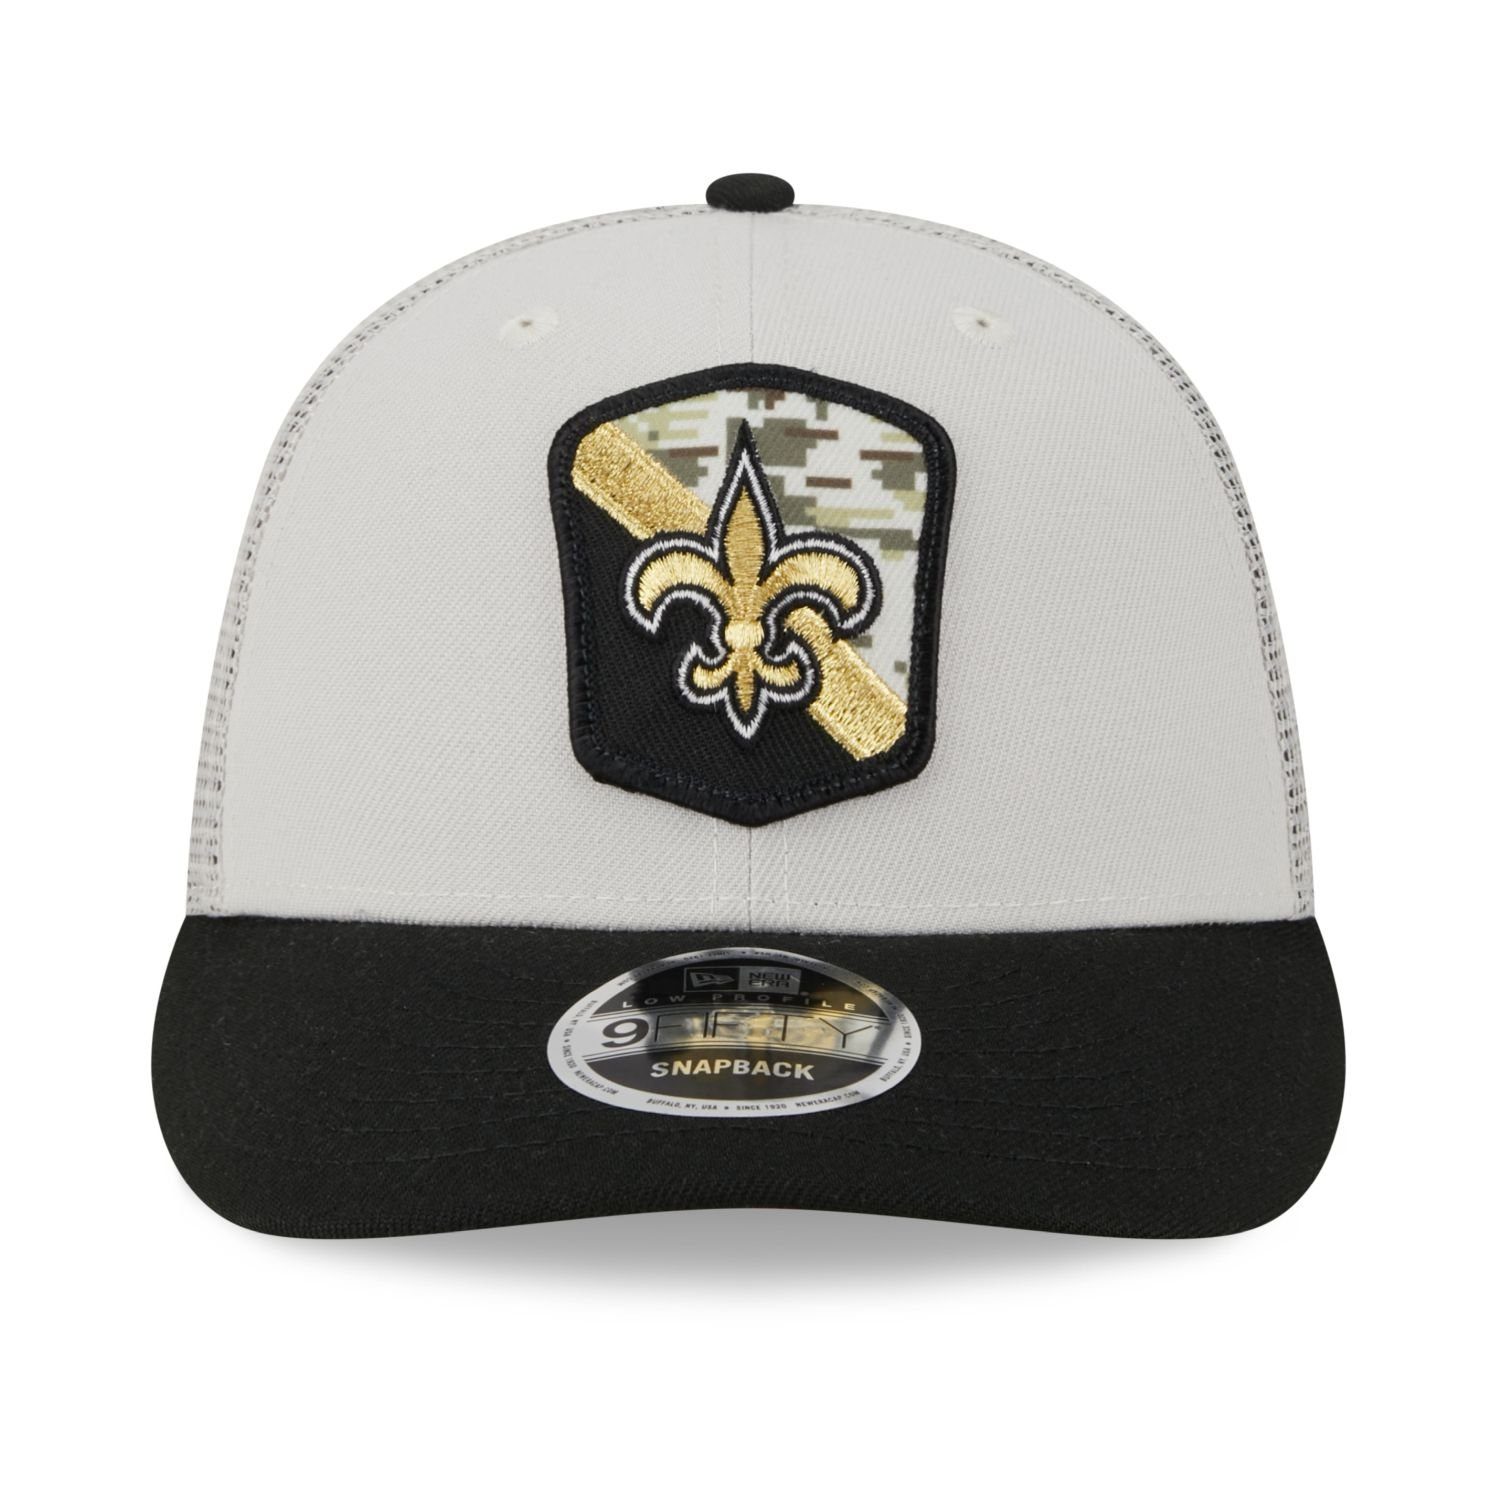 New Era Snapback Cap 9Fifty Low NFL Orleans Profile Salute Saints New Snap to Service